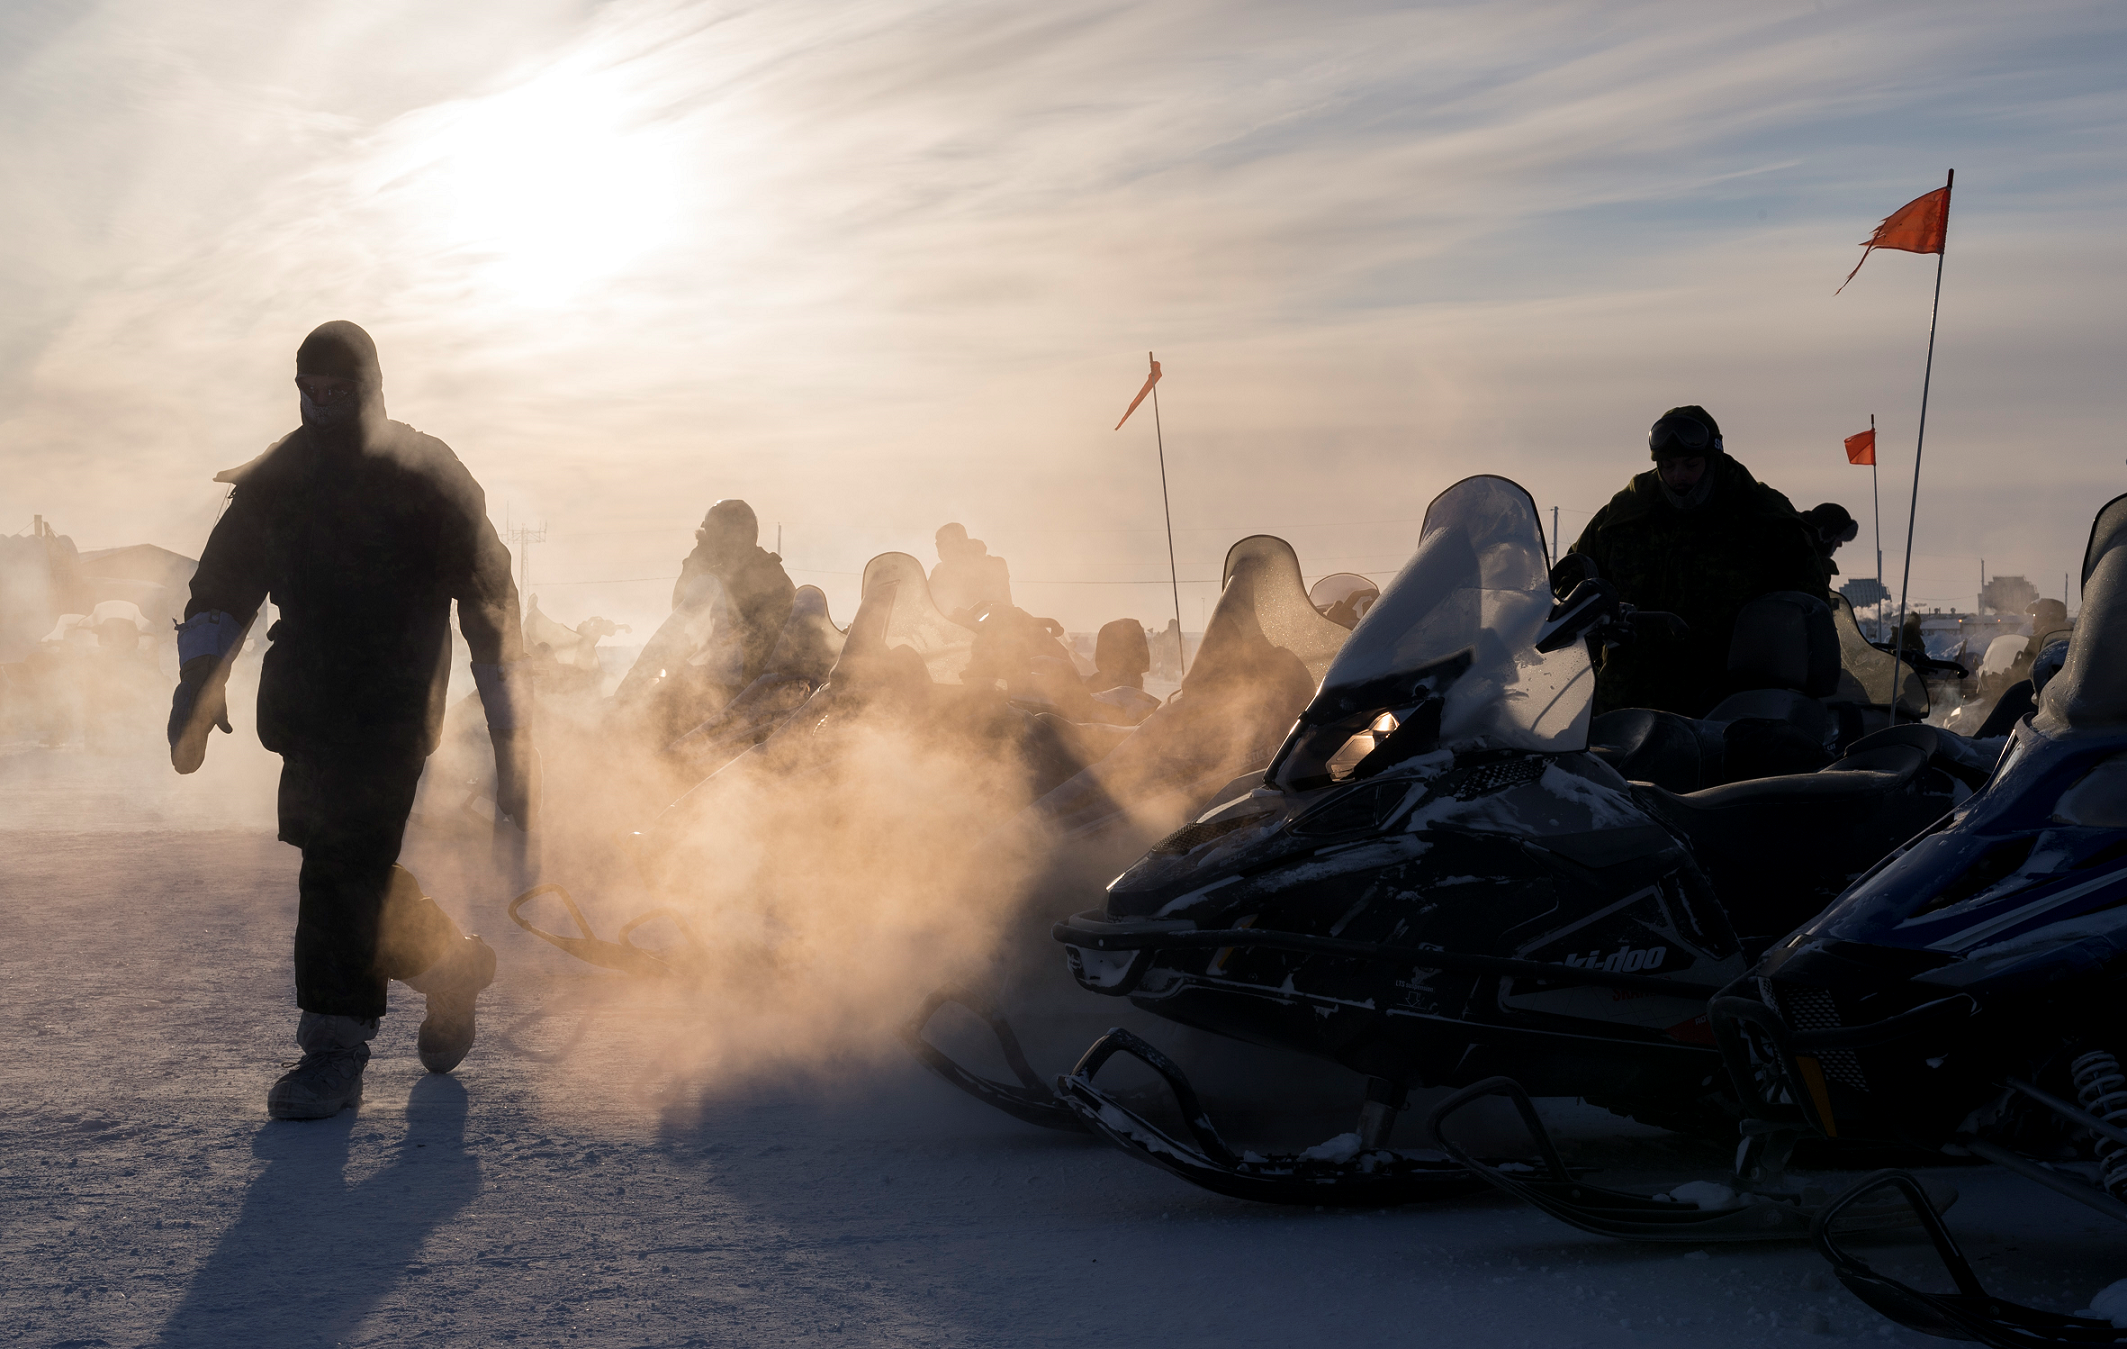 February 24, 2017. Deployed members from 12e Régiment blindé du Canada warm up the engines of Light Over Snow Vehicles in preparation for a patrol during Operation NUNALIVUT 2017 in Hall Beach, Nunavut February 24, 2017. (Photo: Sgt Jean-François Lauzé, Task Force Imagery Technician)